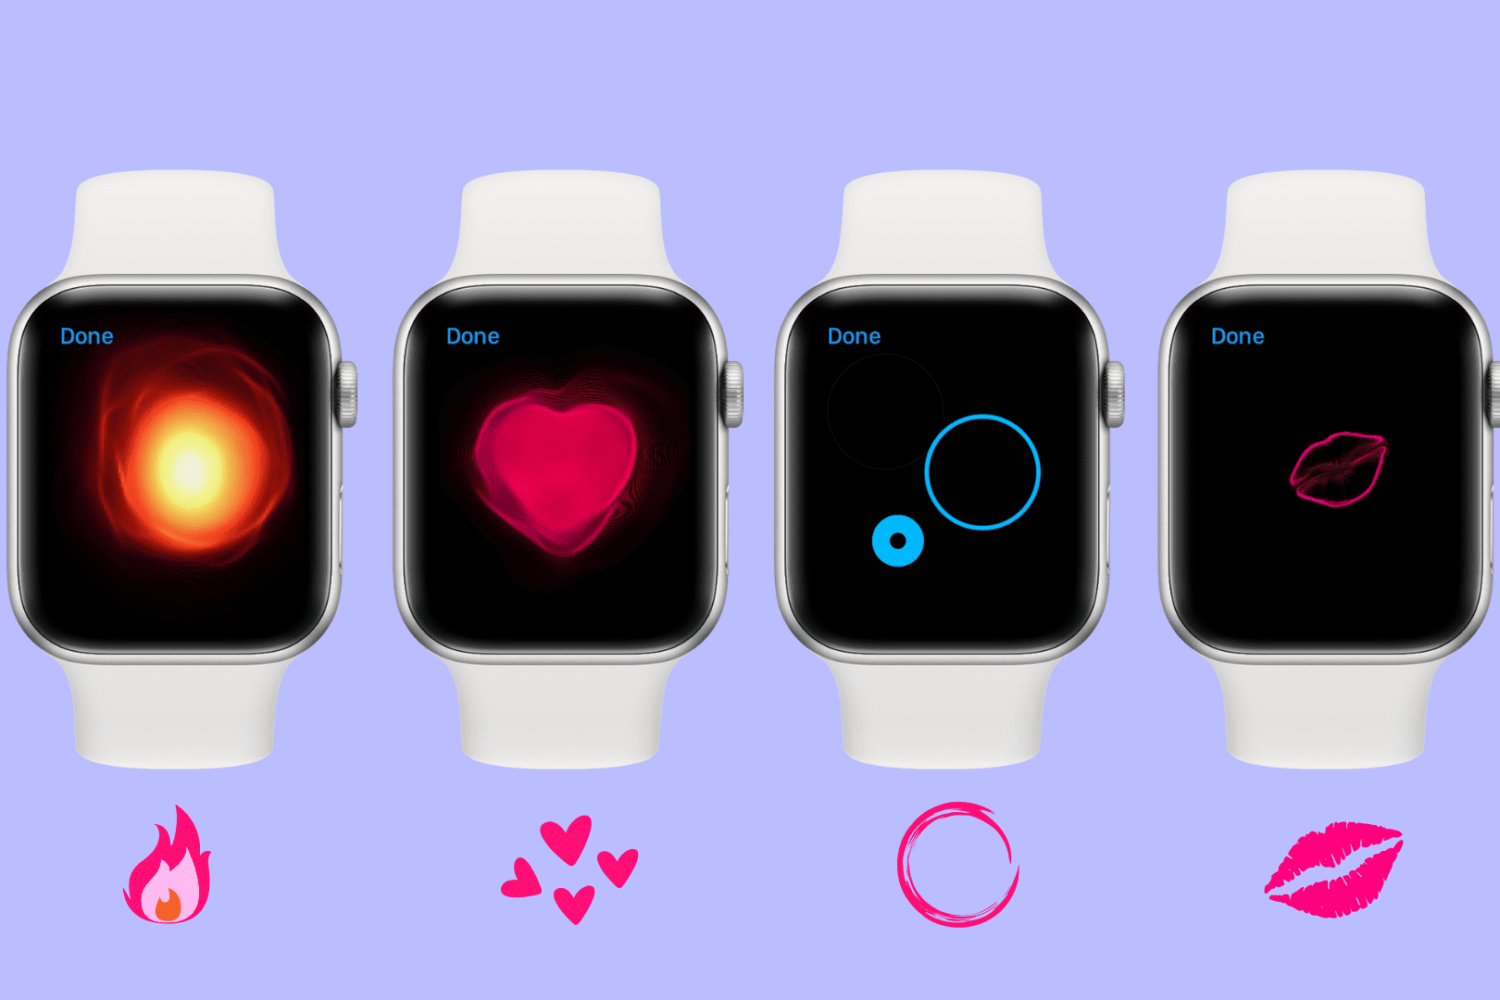 Four Apple Watch mockups showing Digital Touch message effects like fireball, heartbeat, taps, and kiss